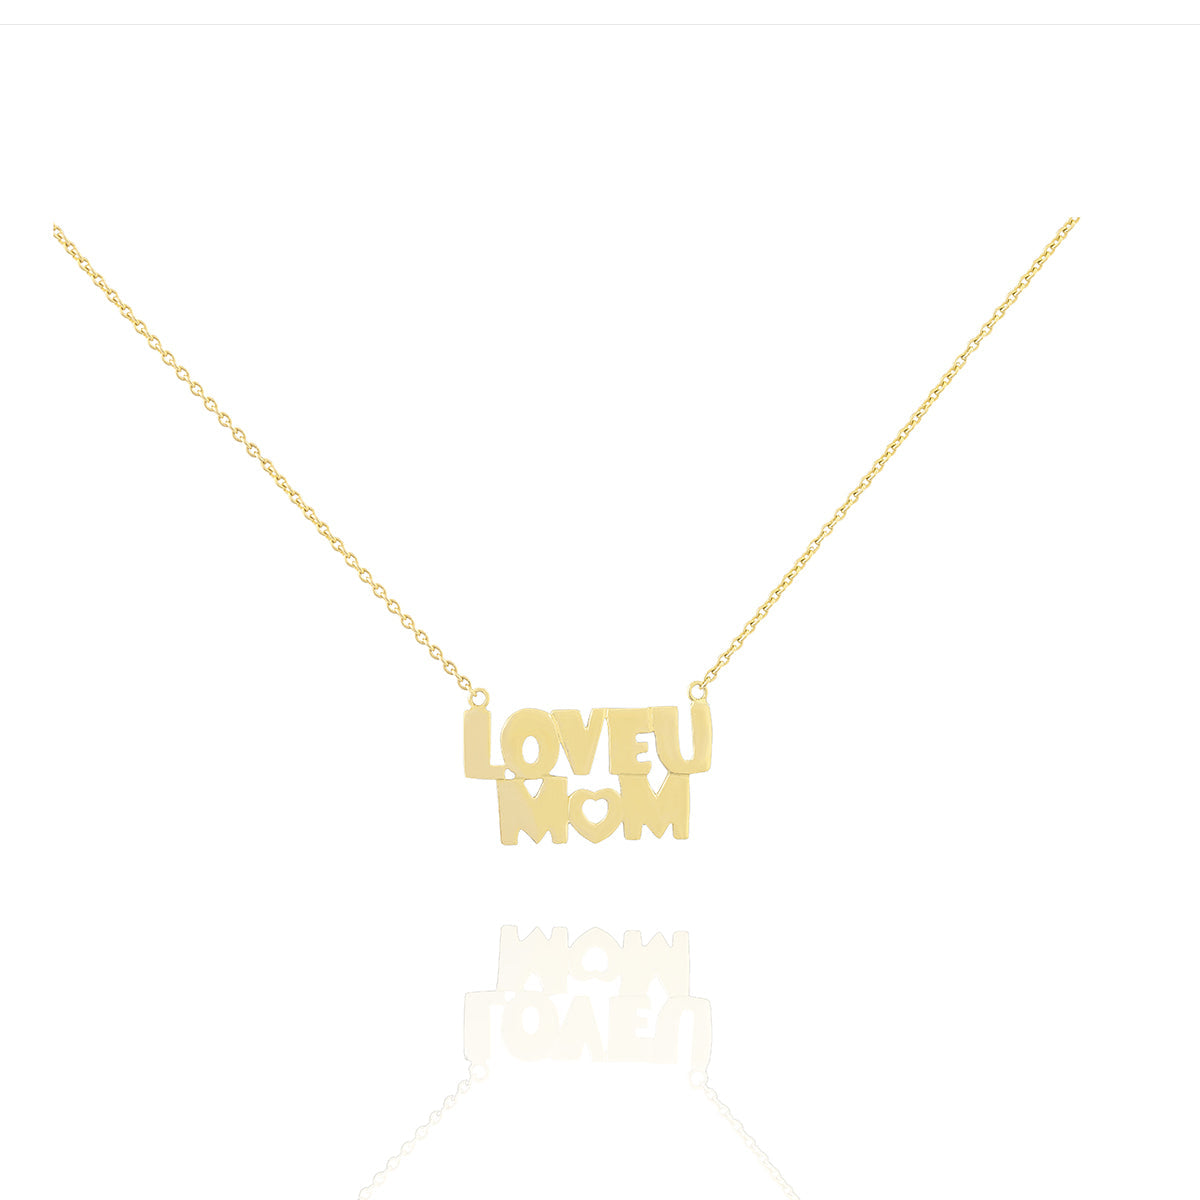 Love You Mom Necklace in 18k Yellow Gold | El Mawardy Jewelry 